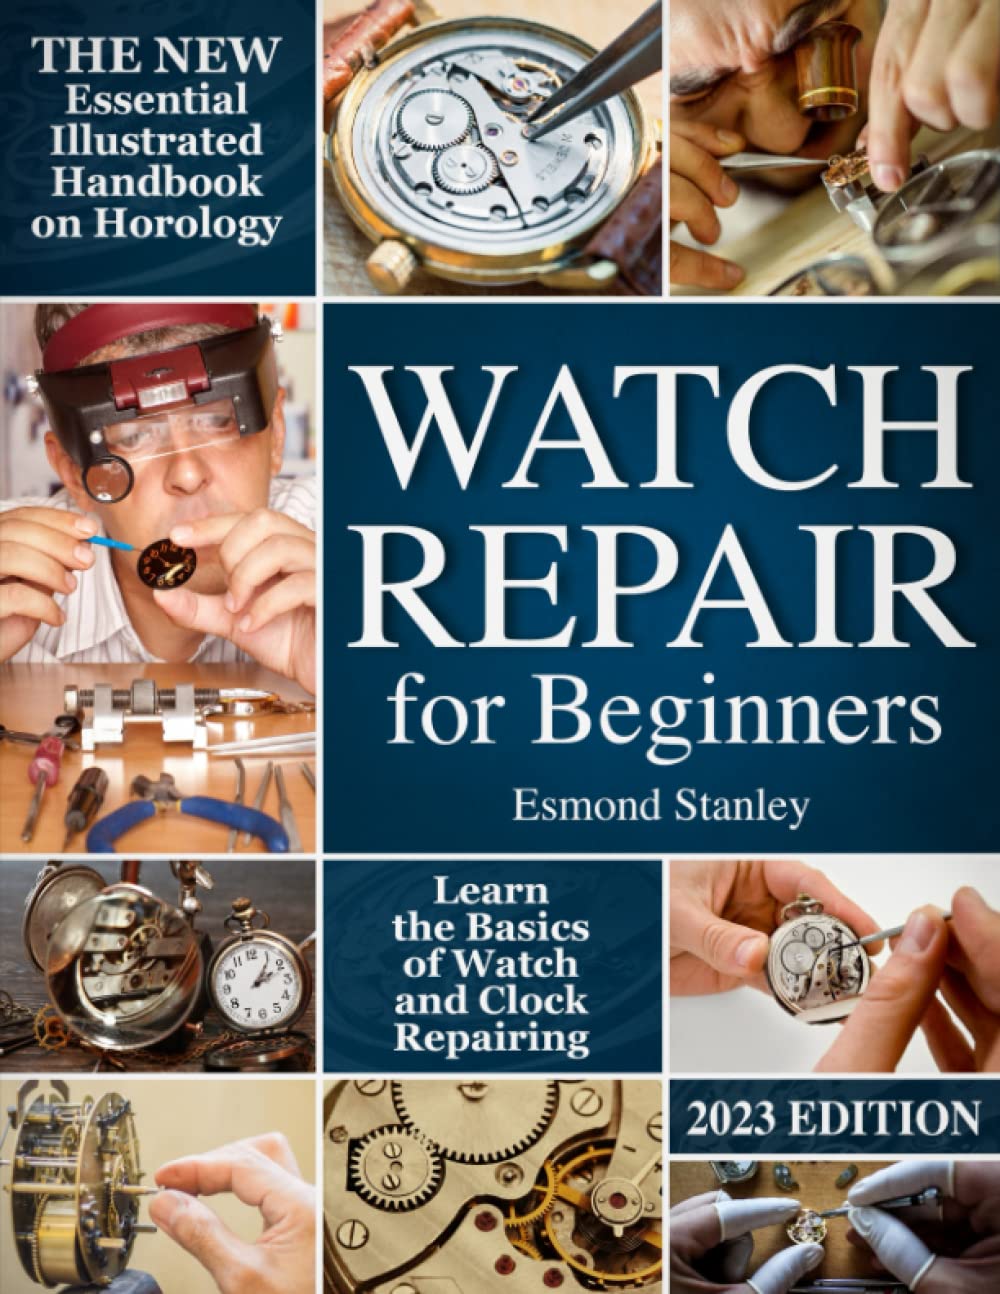 Watch Repair for Beginners: The New Essential Illustrated Handbook on Horology to Learn the Basics of Watch and Clock Repairing